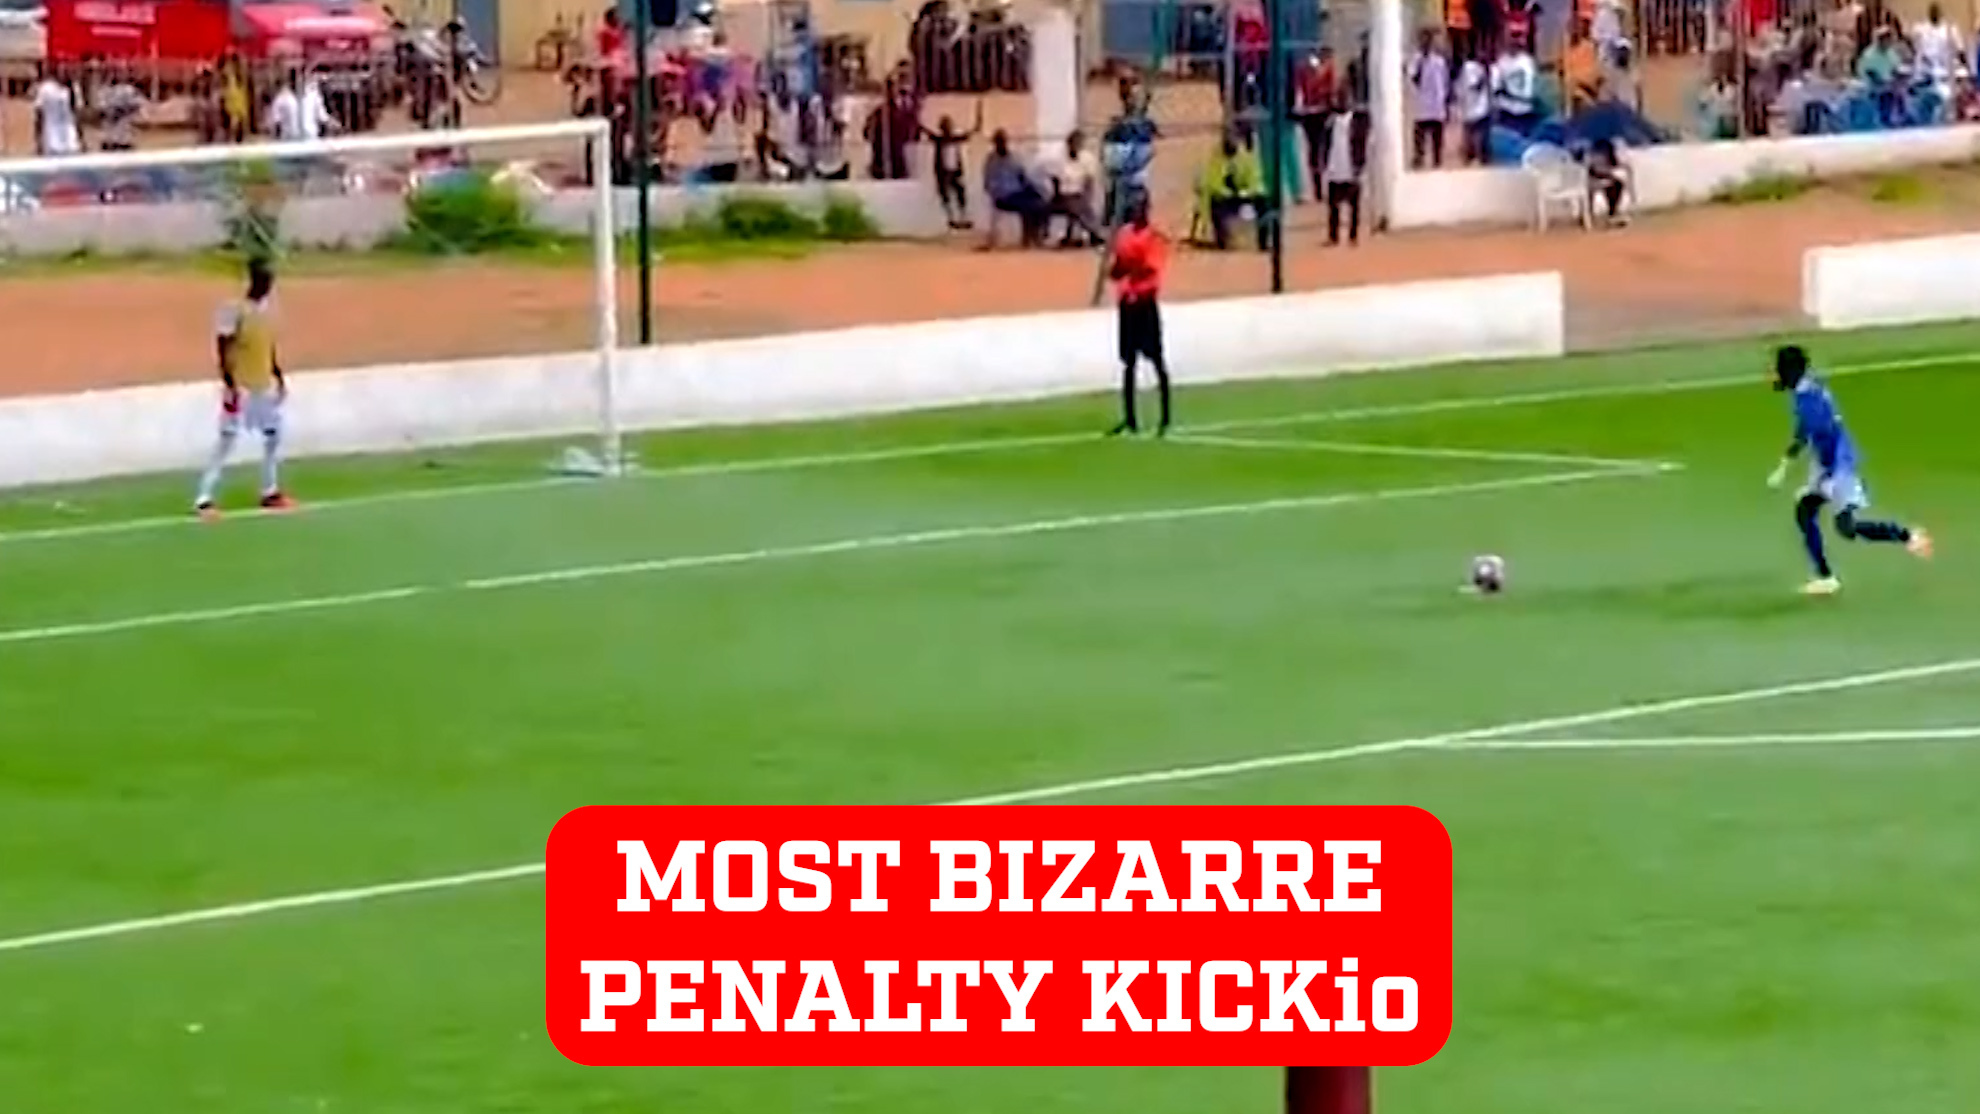 The most bizarre penalty kick in soccer history